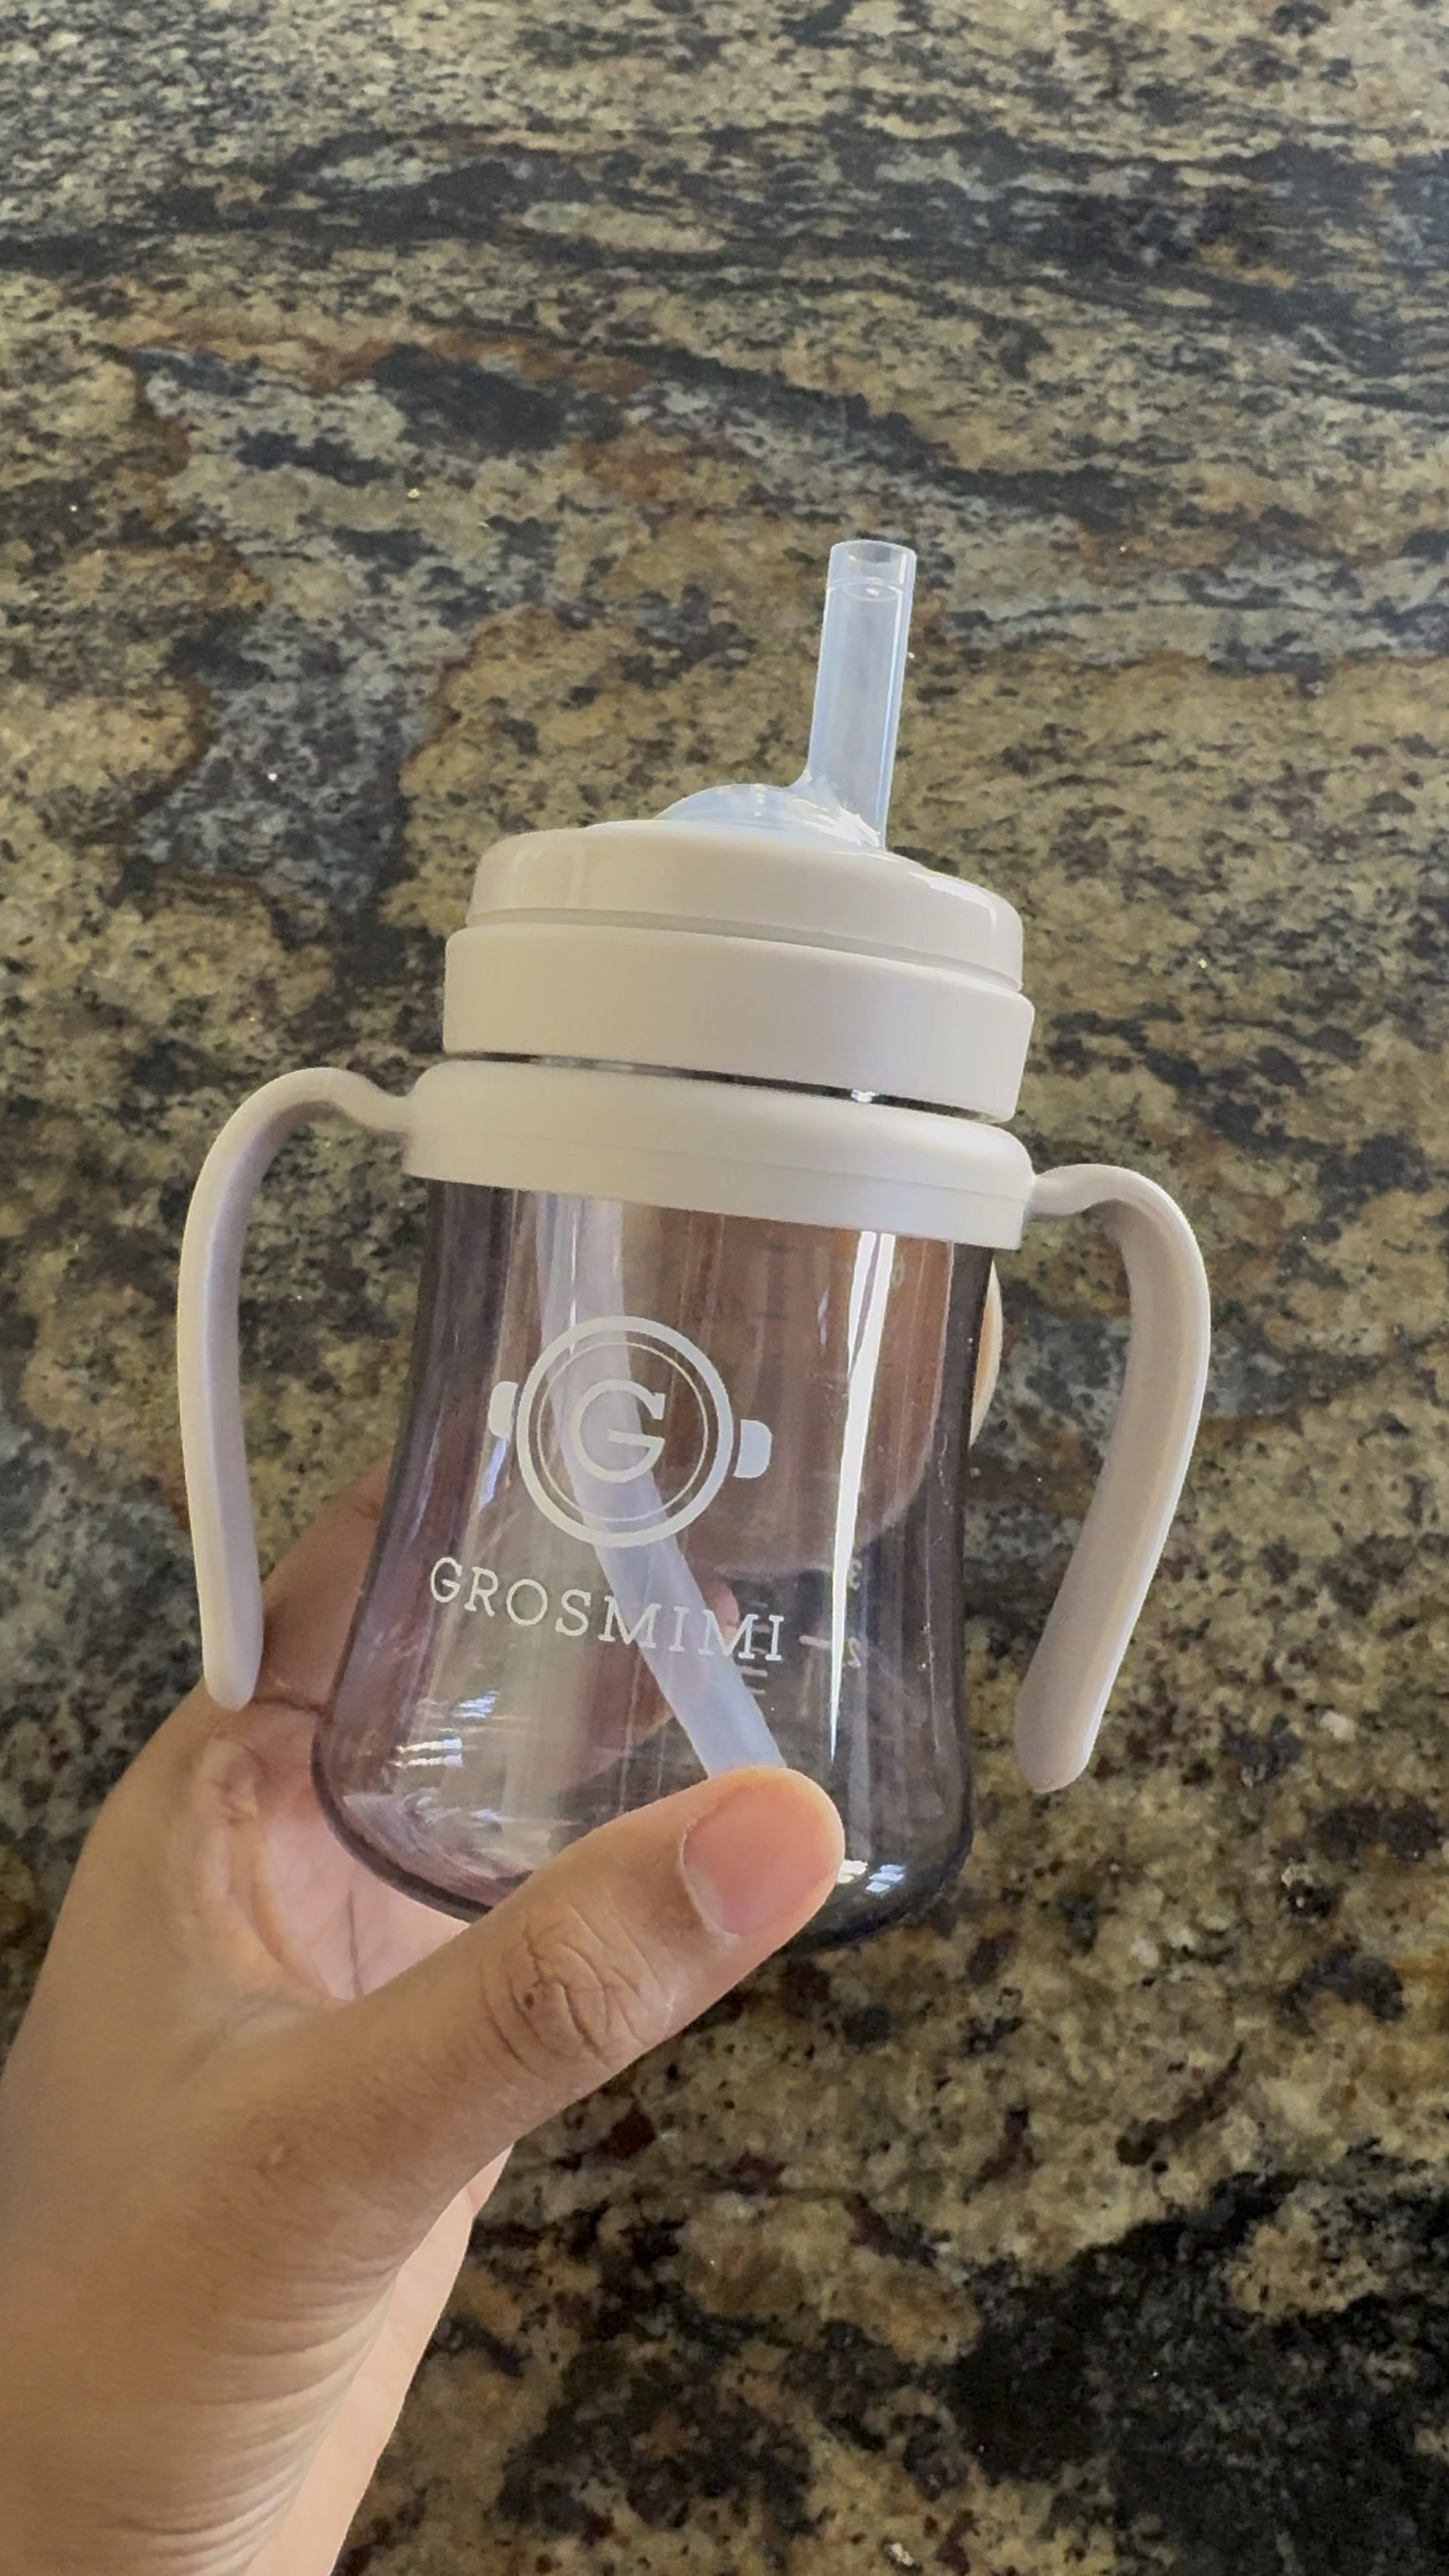 Grosmimi Straw Cup and Accessories